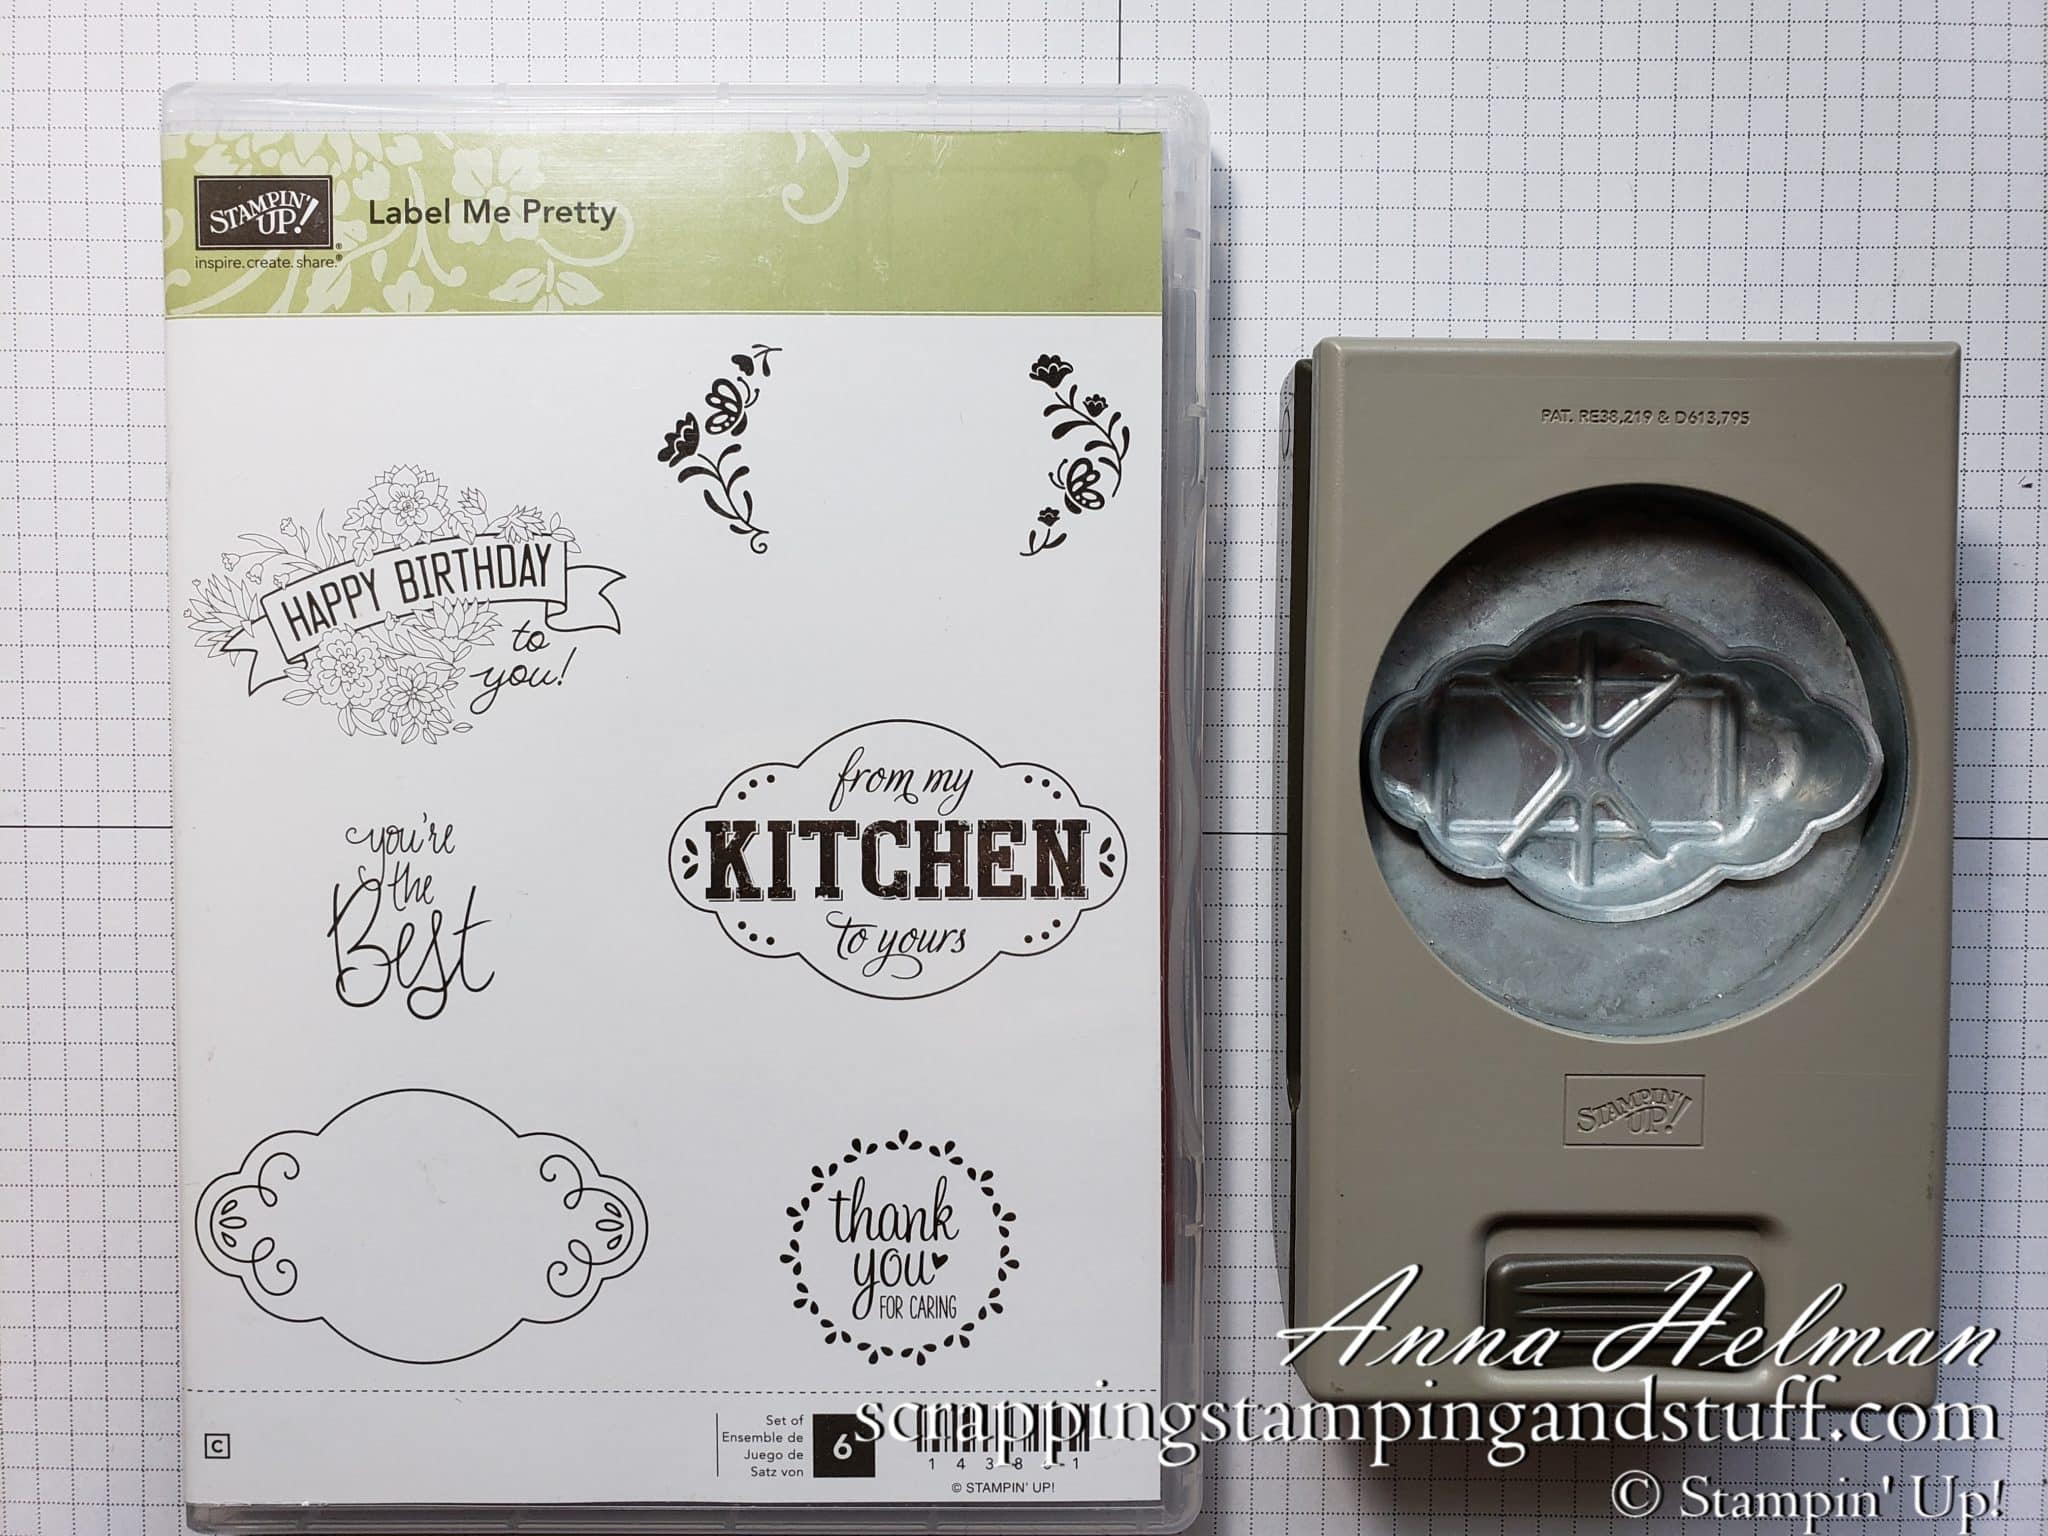 Cardmaking 101 Lesson 7: Using Punches For Cardmaking and Scrapbooking